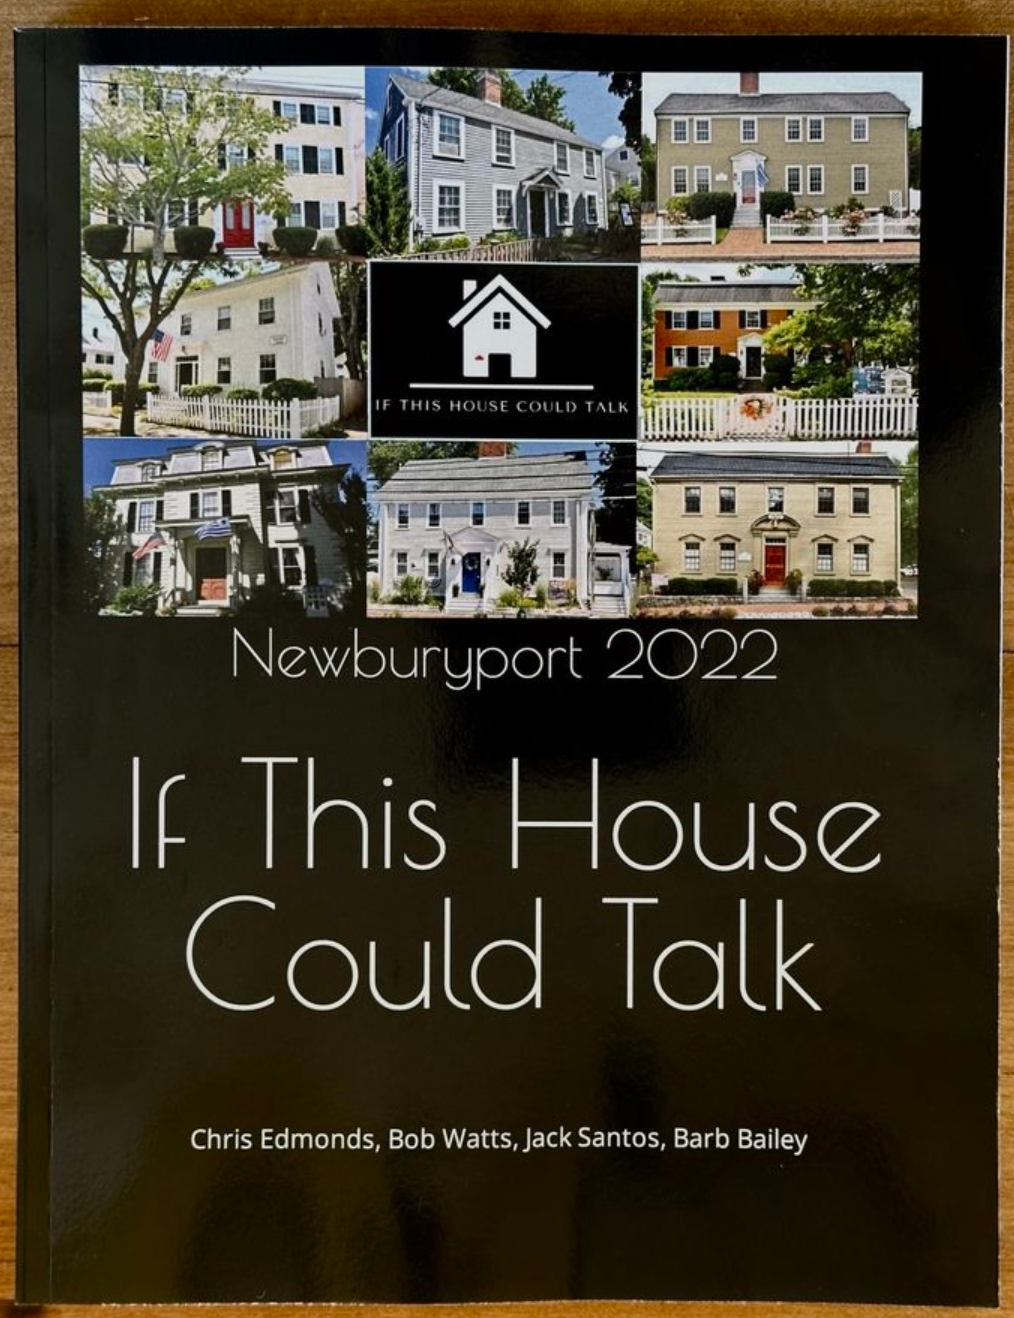 If This House Could Talk - Newburyport 2022 Edition